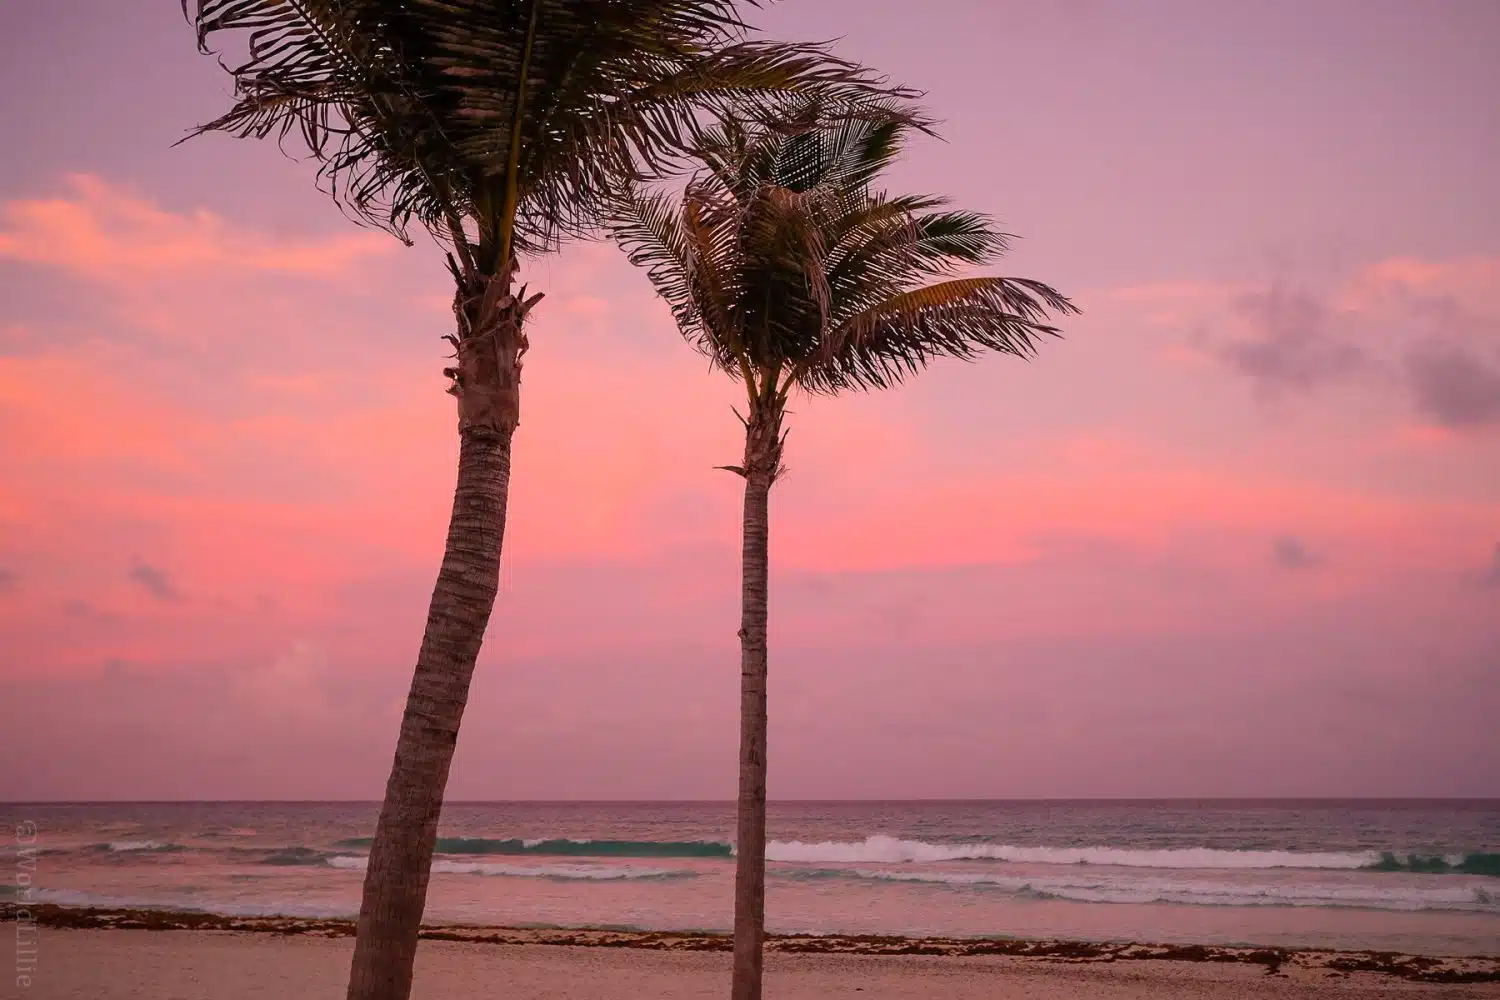 A pink sunset on the Cancun beach.